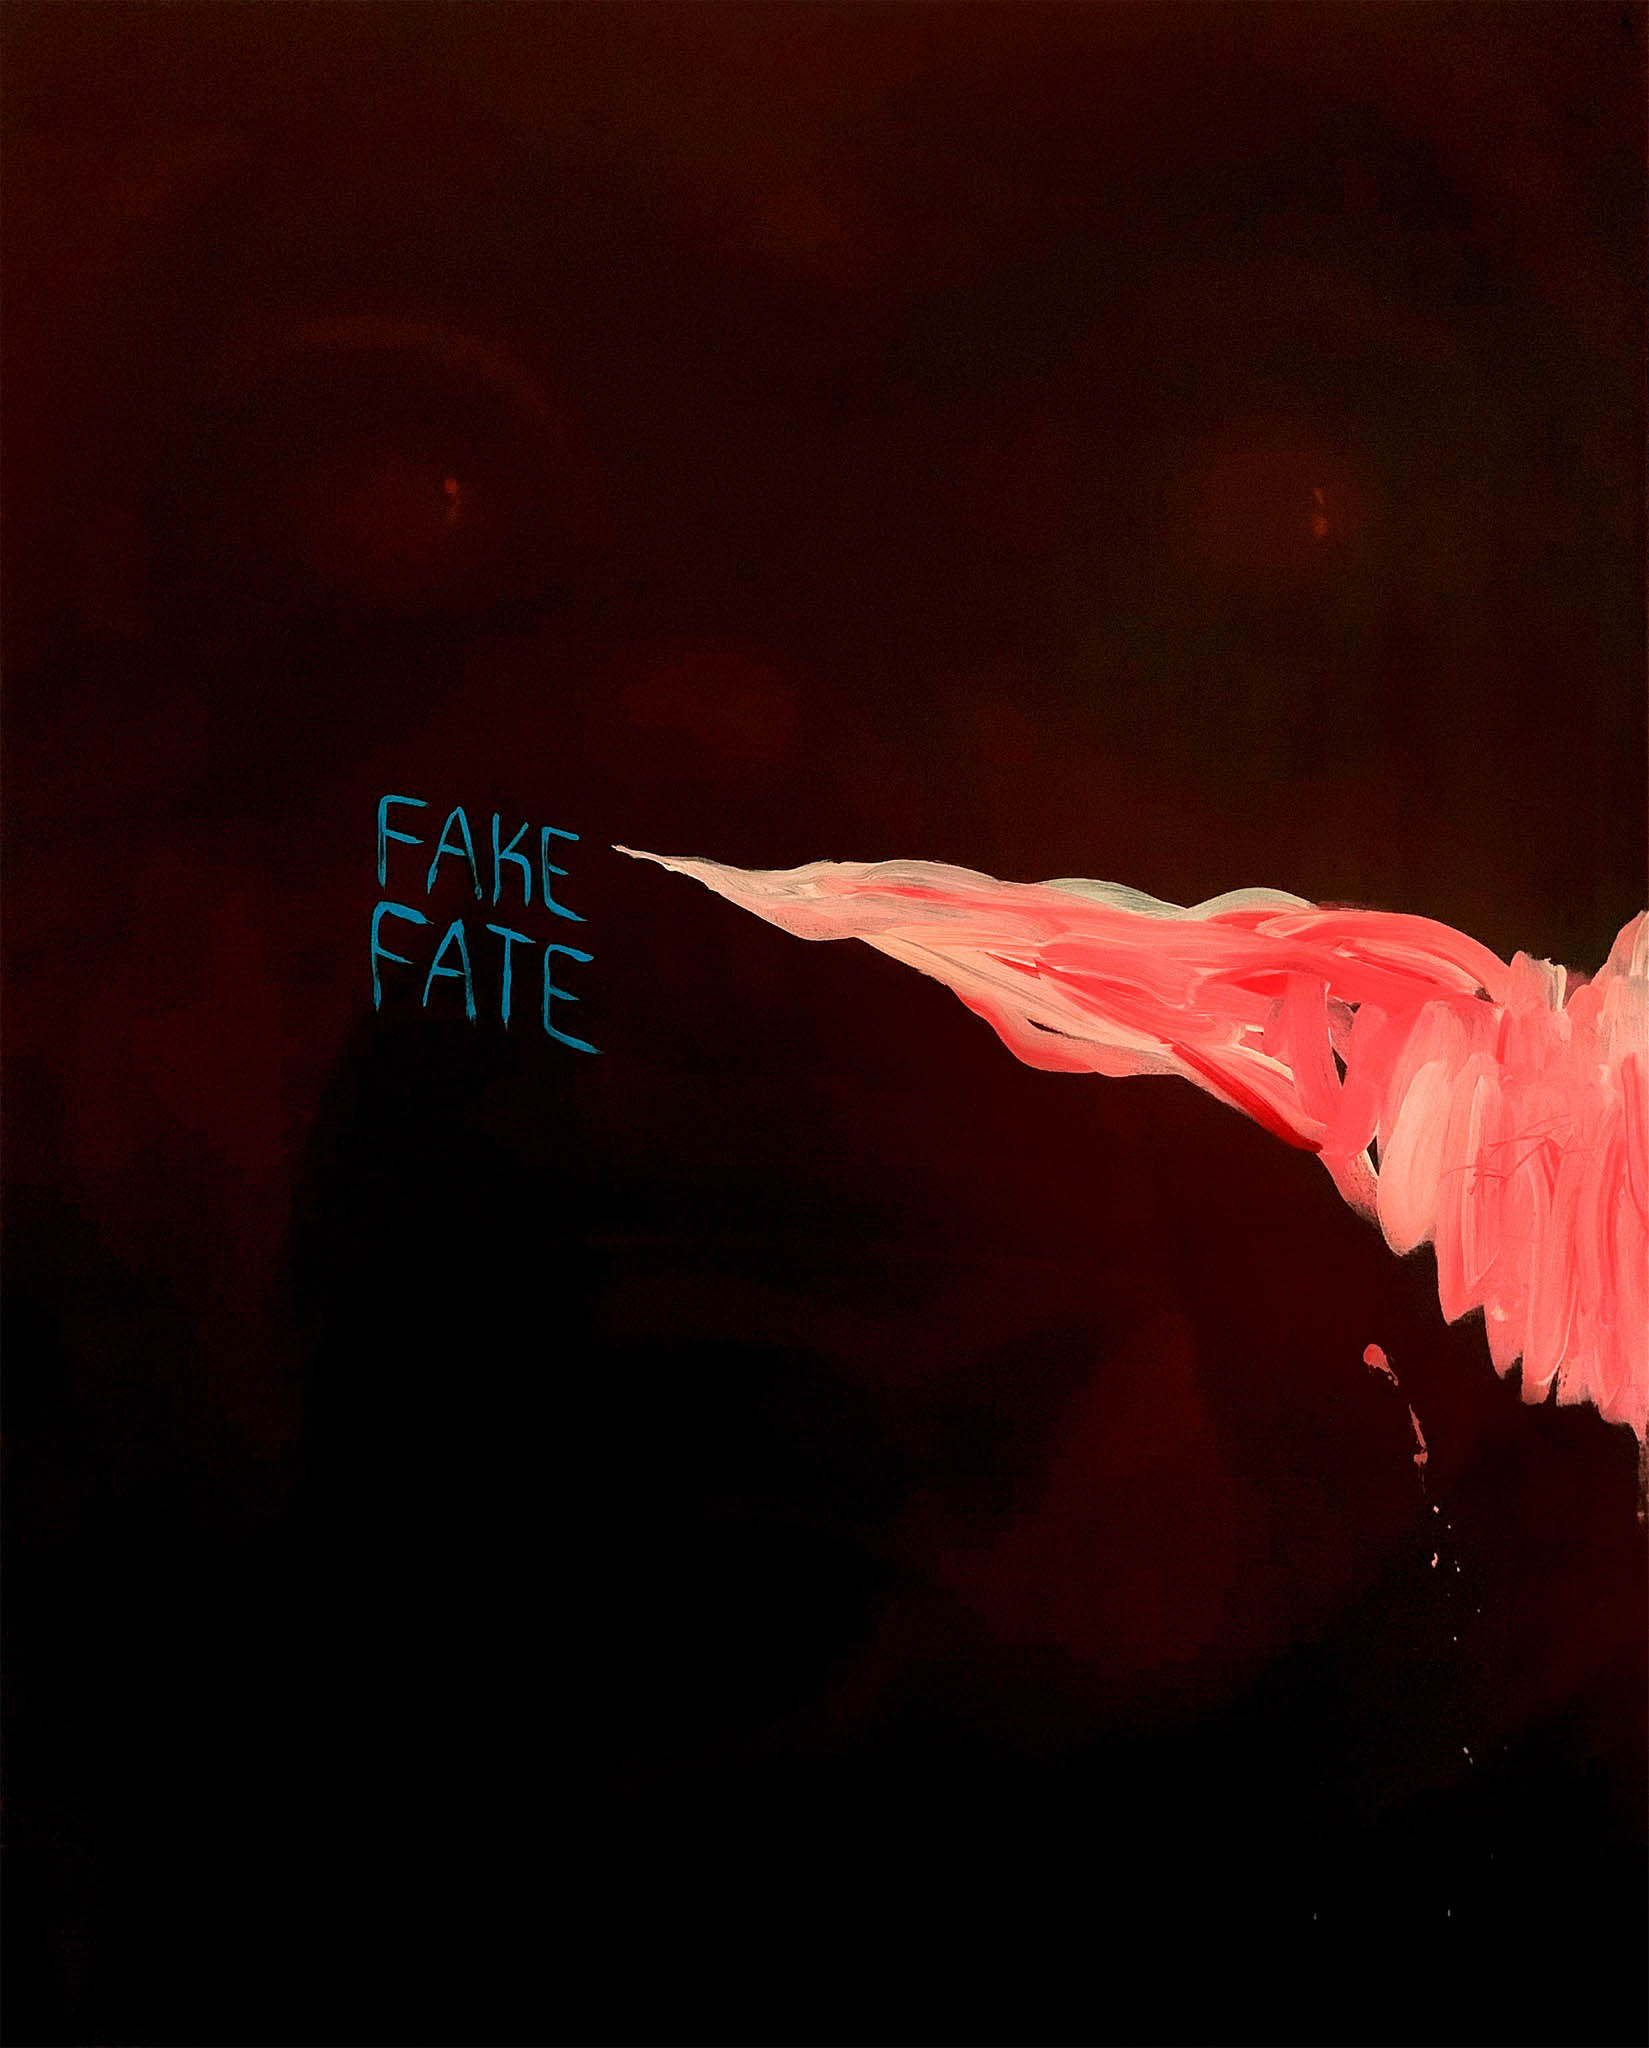 Fake Fate by Kiko Escora. Photo from Modeka Art's official Facebook page